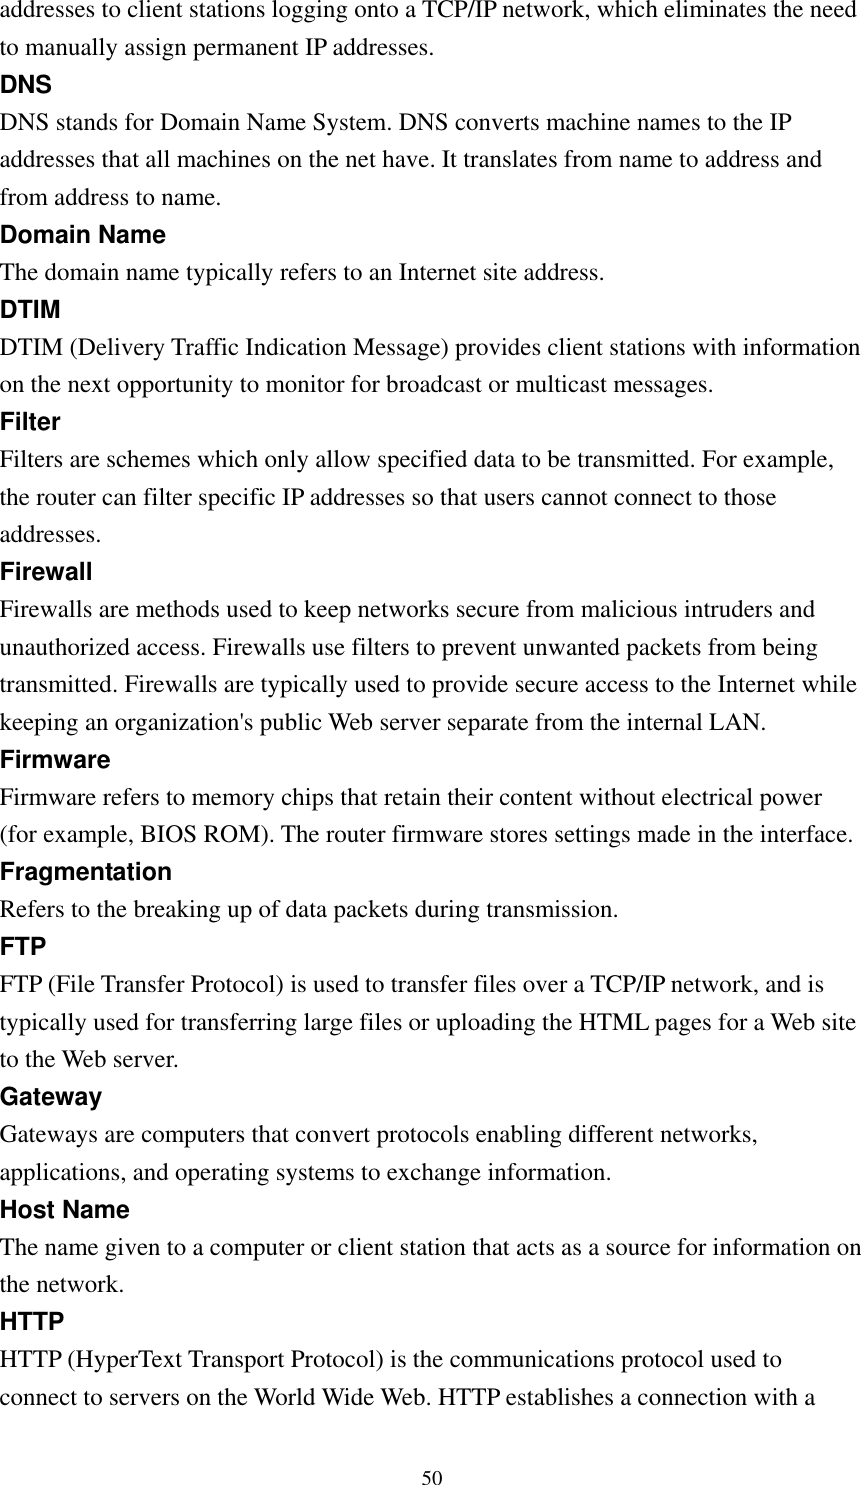  50addresses to client stations logging onto a TCP/IP network, which eliminates the need to manually assign permanent IP addresses. DNS DNS stands for Domain Name System. DNS converts machine names to the IP addresses that all machines on the net have. It translates from name to address and from address to name. Domain Name The domain name typically refers to an Internet site address. DTIM DTIM (Delivery Traffic Indication Message) provides client stations with information on the next opportunity to monitor for broadcast or multicast messages. Filter Filters are schemes which only allow specified data to be transmitted. For example, the router can filter specific IP addresses so that users cannot connect to those addresses. Firewall Firewalls are methods used to keep networks secure from malicious intruders and unauthorized access. Firewalls use filters to prevent unwanted packets from being transmitted. Firewalls are typically used to provide secure access to the Internet while keeping an organization&apos;s public Web server separate from the internal LAN. Firmware Firmware refers to memory chips that retain their content without electrical power (for example, BIOS ROM). The router firmware stores settings made in the interface. Fragmentation Refers to the breaking up of data packets during transmission. FTP FTP (File Transfer Protocol) is used to transfer files over a TCP/IP network, and is typically used for transferring large files or uploading the HTML pages for a Web site to the Web server. Gateway Gateways are computers that convert protocols enabling different networks, applications, and operating systems to exchange information. Host Name The name given to a computer or client station that acts as a source for information on the network. HTTP HTTP (HyperText Transport Protocol) is the communications protocol used to connect to servers on the World Wide Web. HTTP establishes a connection with a 